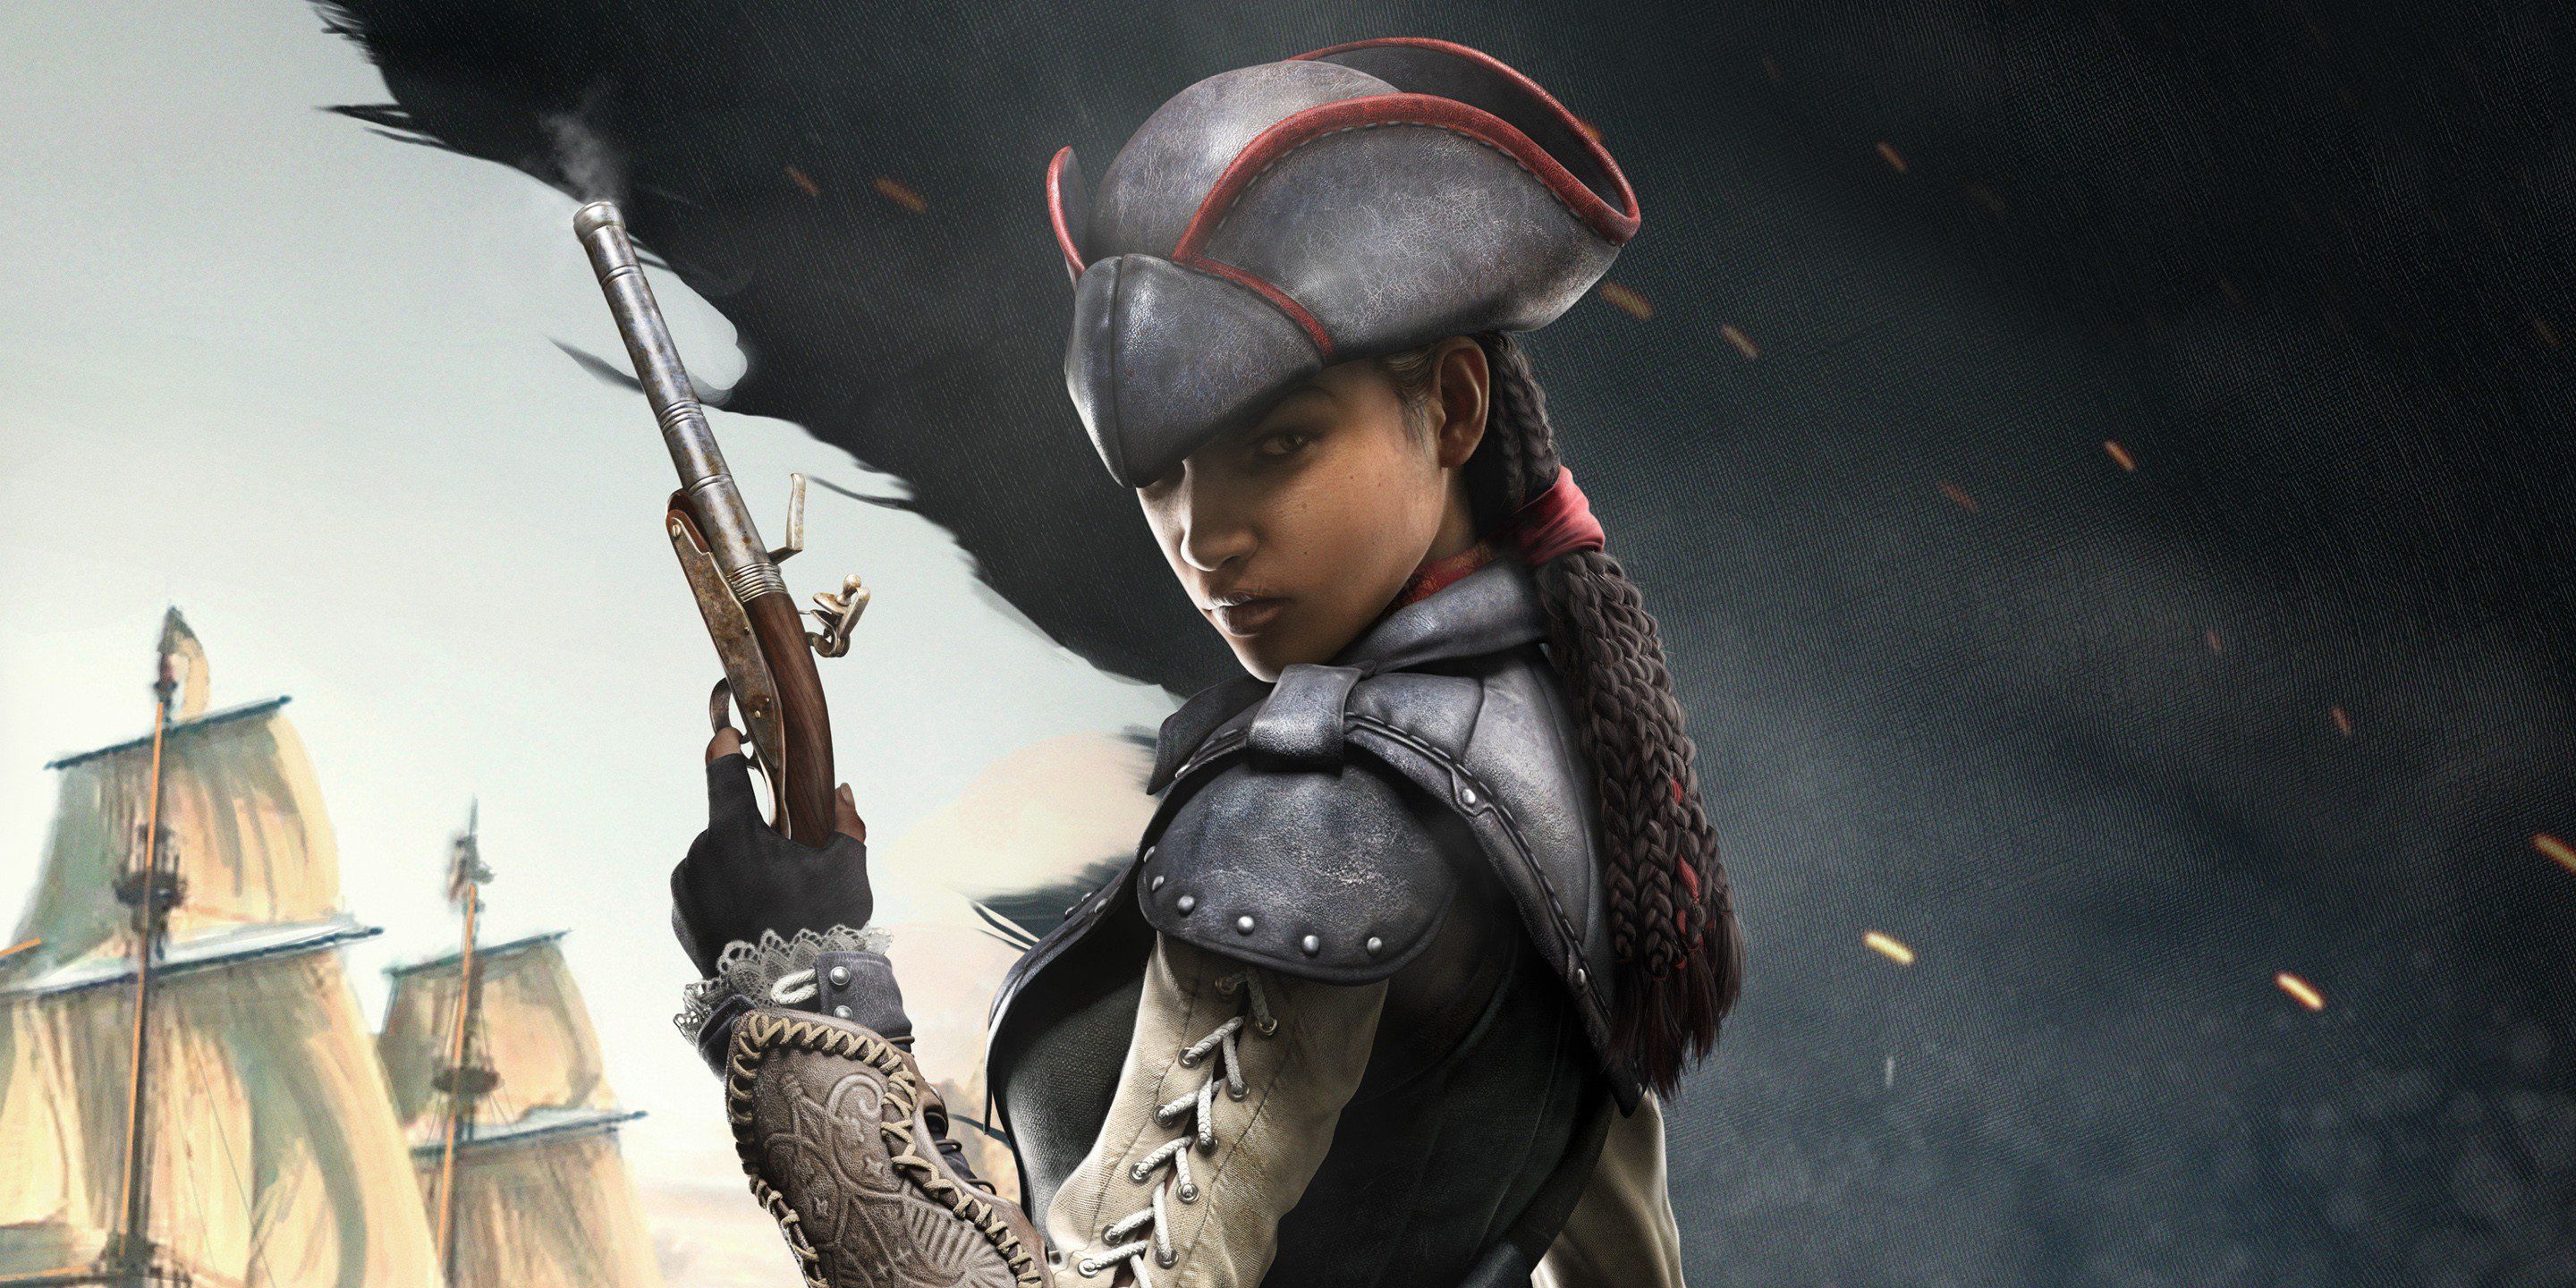 Aveline holds a gun in Assassins Creed Liberation 